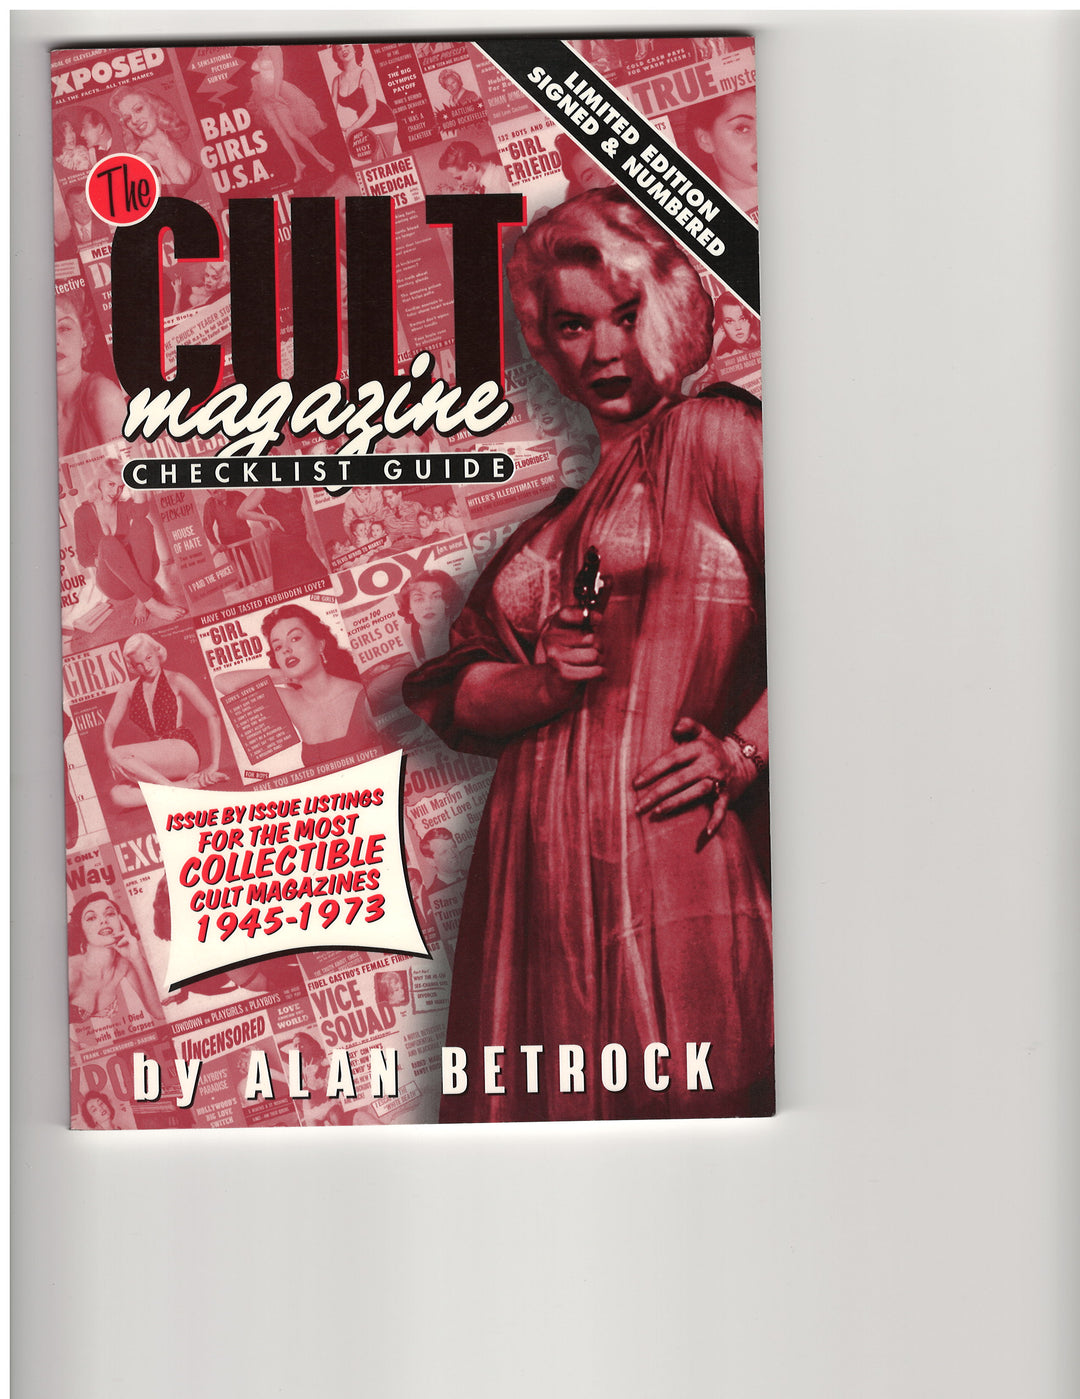 The Cult Magazine Checklist Guide - 1945-1973 SIGNED and NUMBERED 306/1250 by Alan Betrock OXD-11